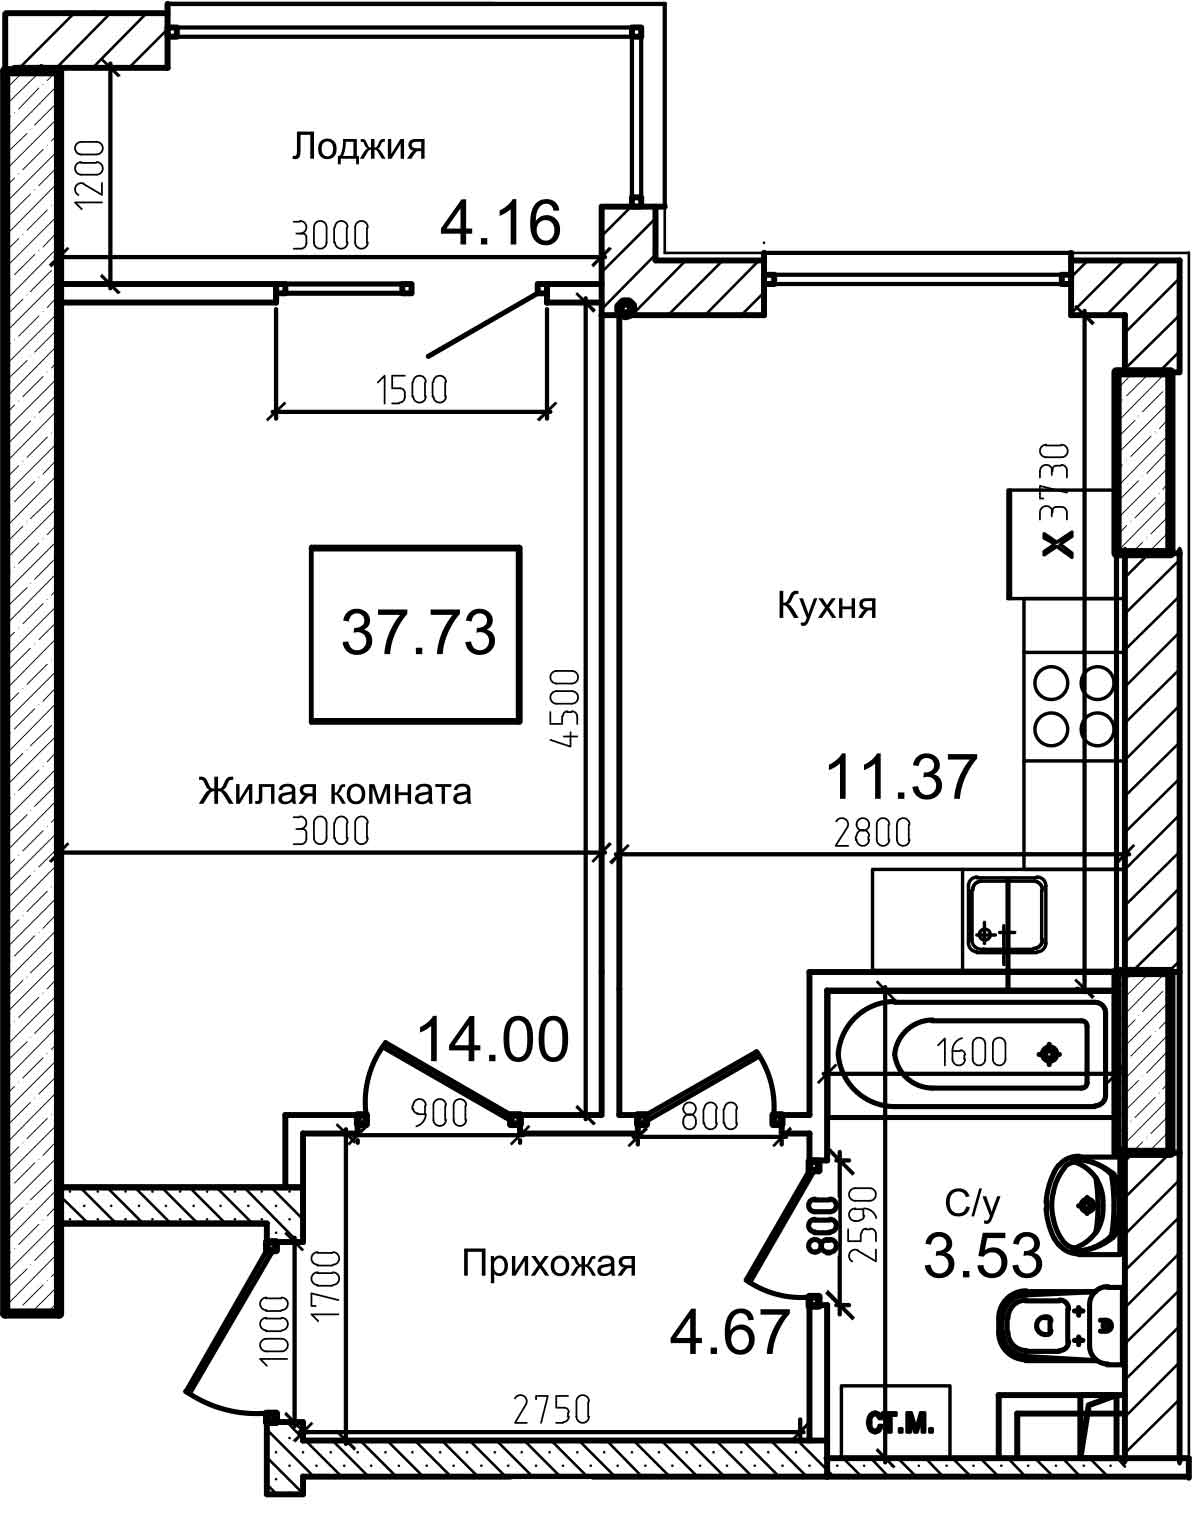 Planning 1-rm flats area 37.3m2, AB-08-06/00011.